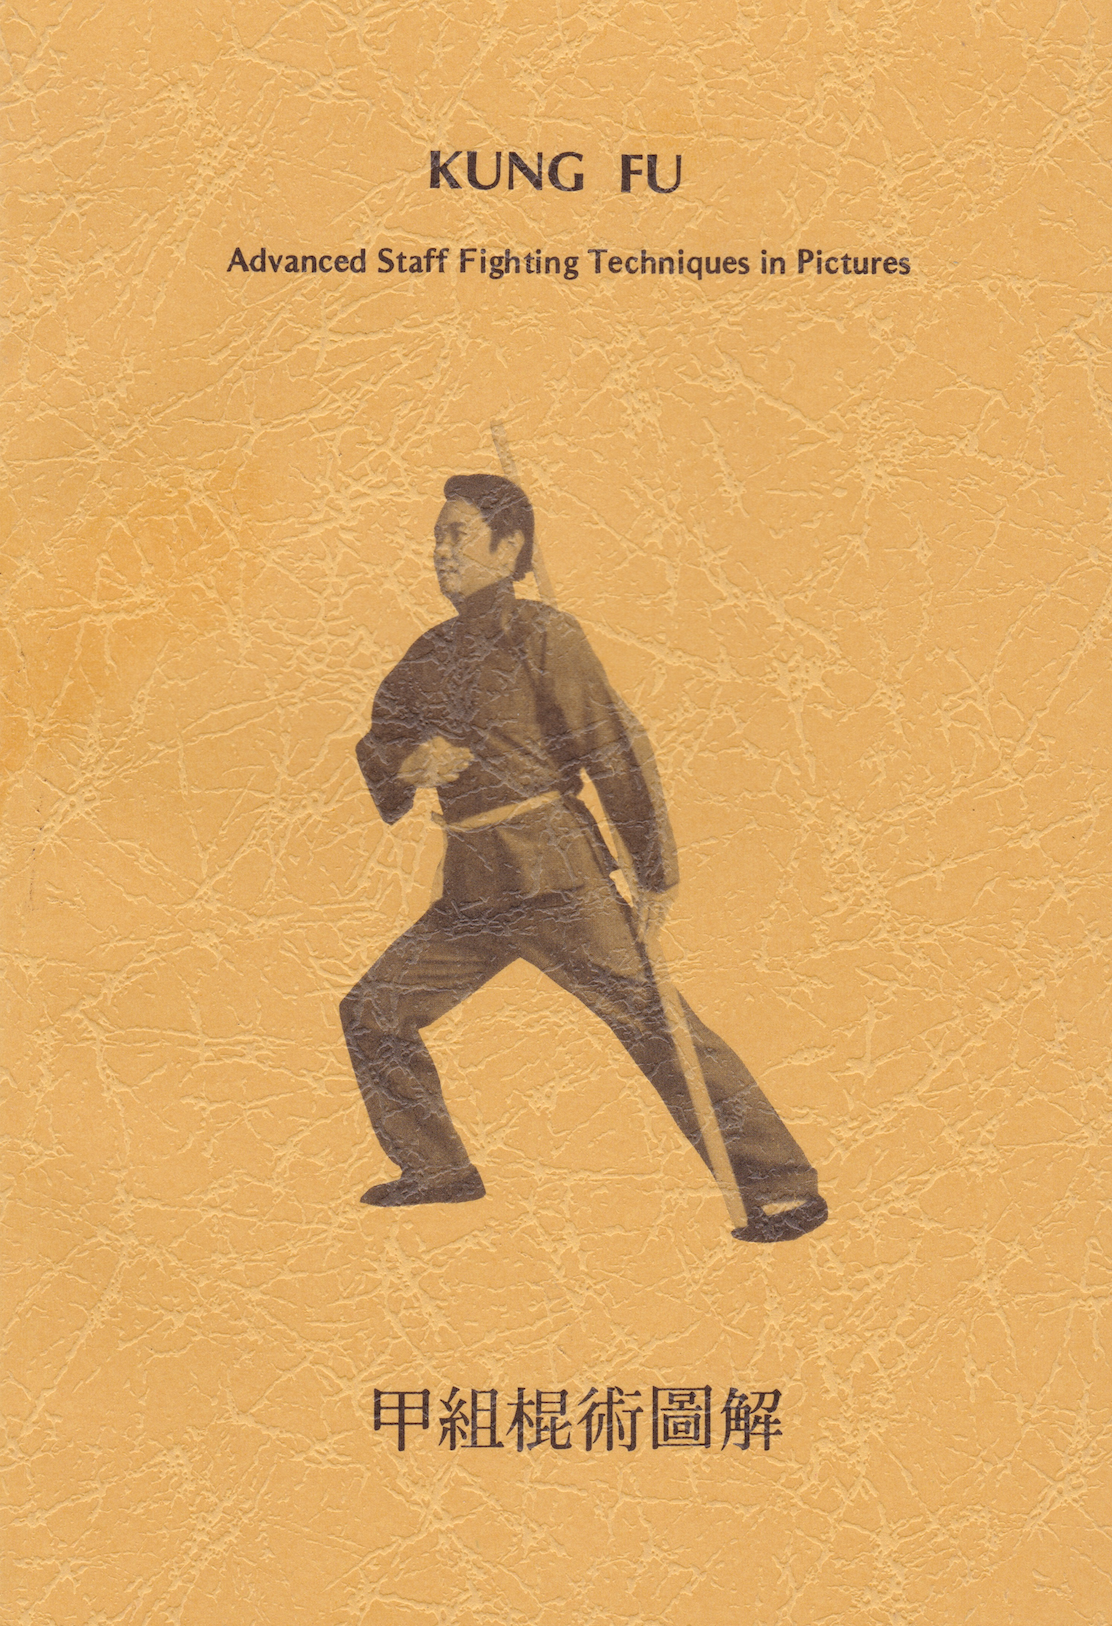 Kung Fu Advanced Staff Fighting Techniques in Pictures Book by Thomas Marks